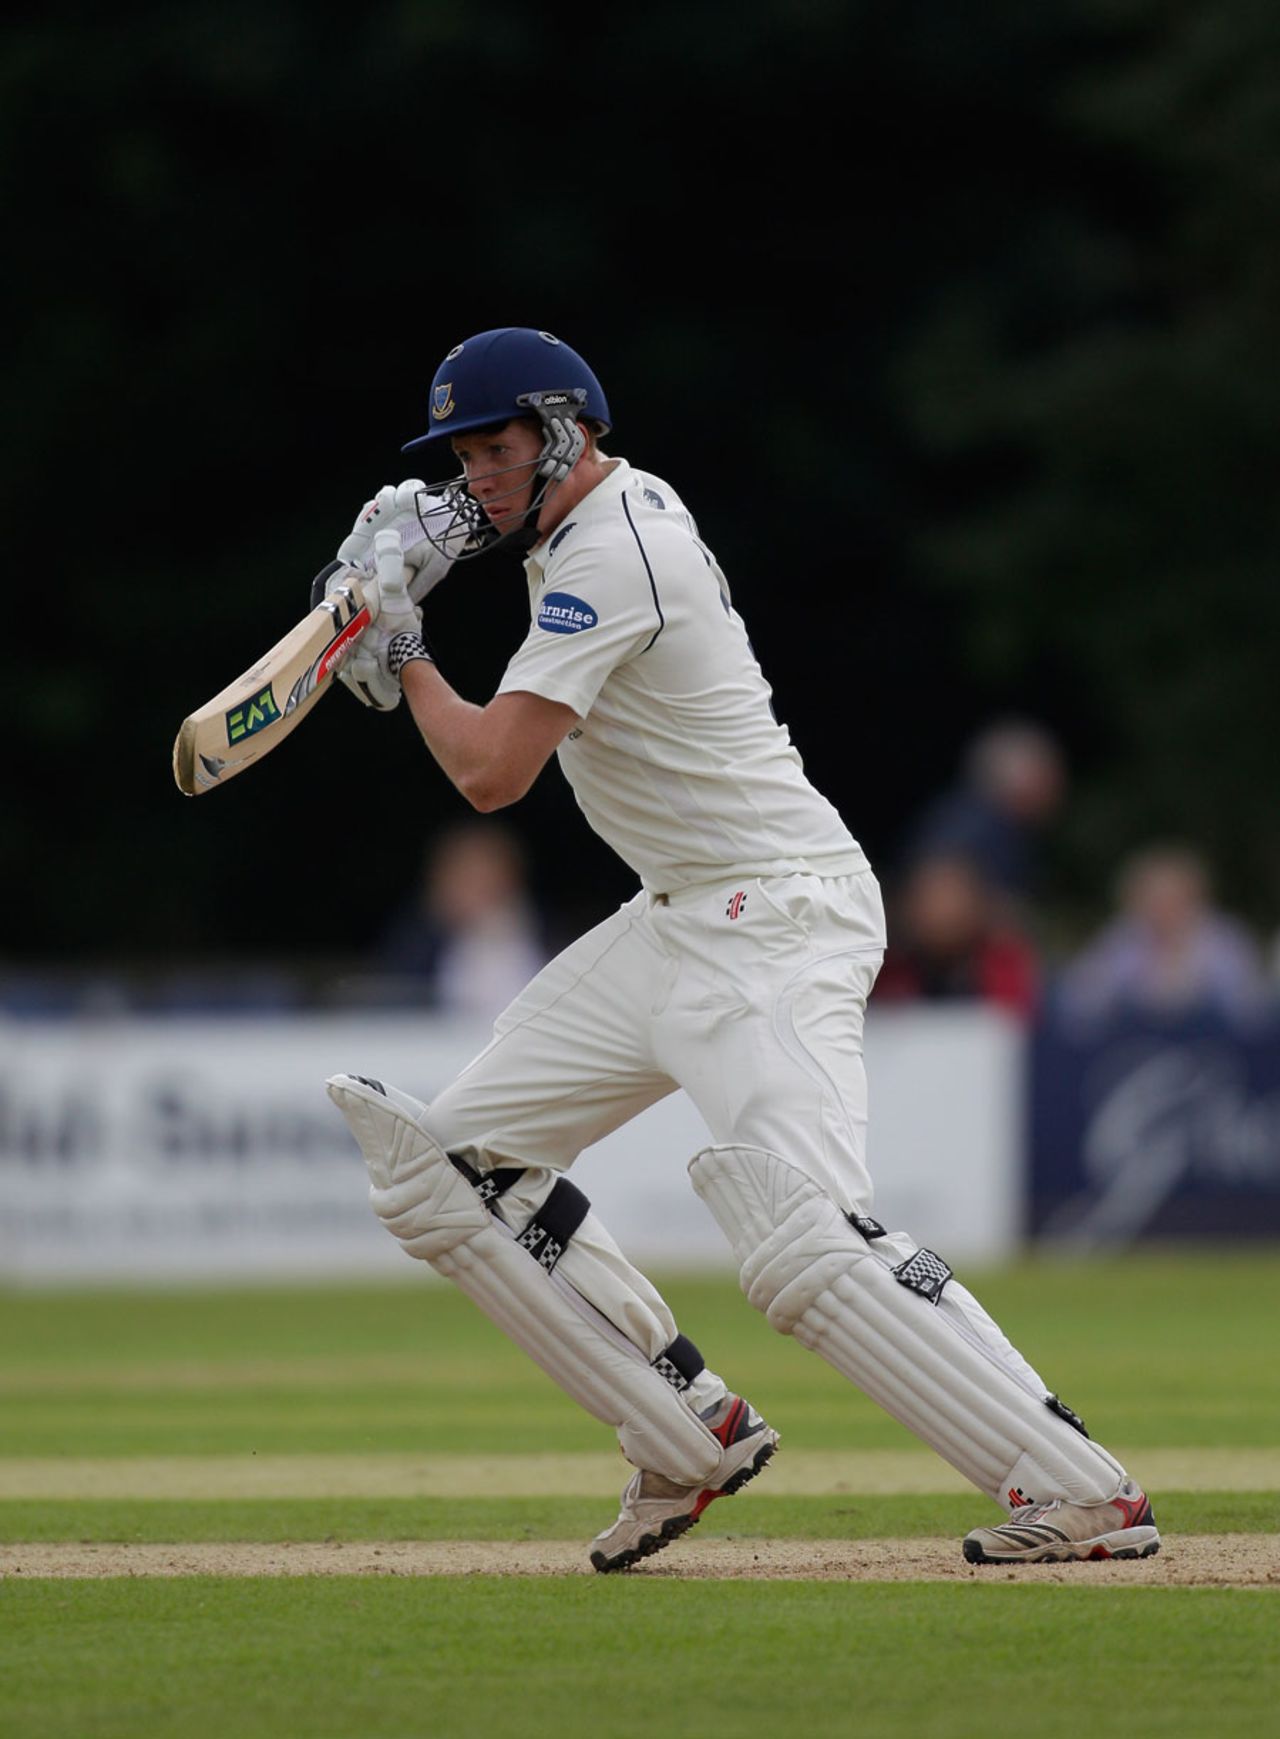 Luke Wells made 41 with seven fours, Sussex v Durham, County Championship, Arundel, July, 19, 2012